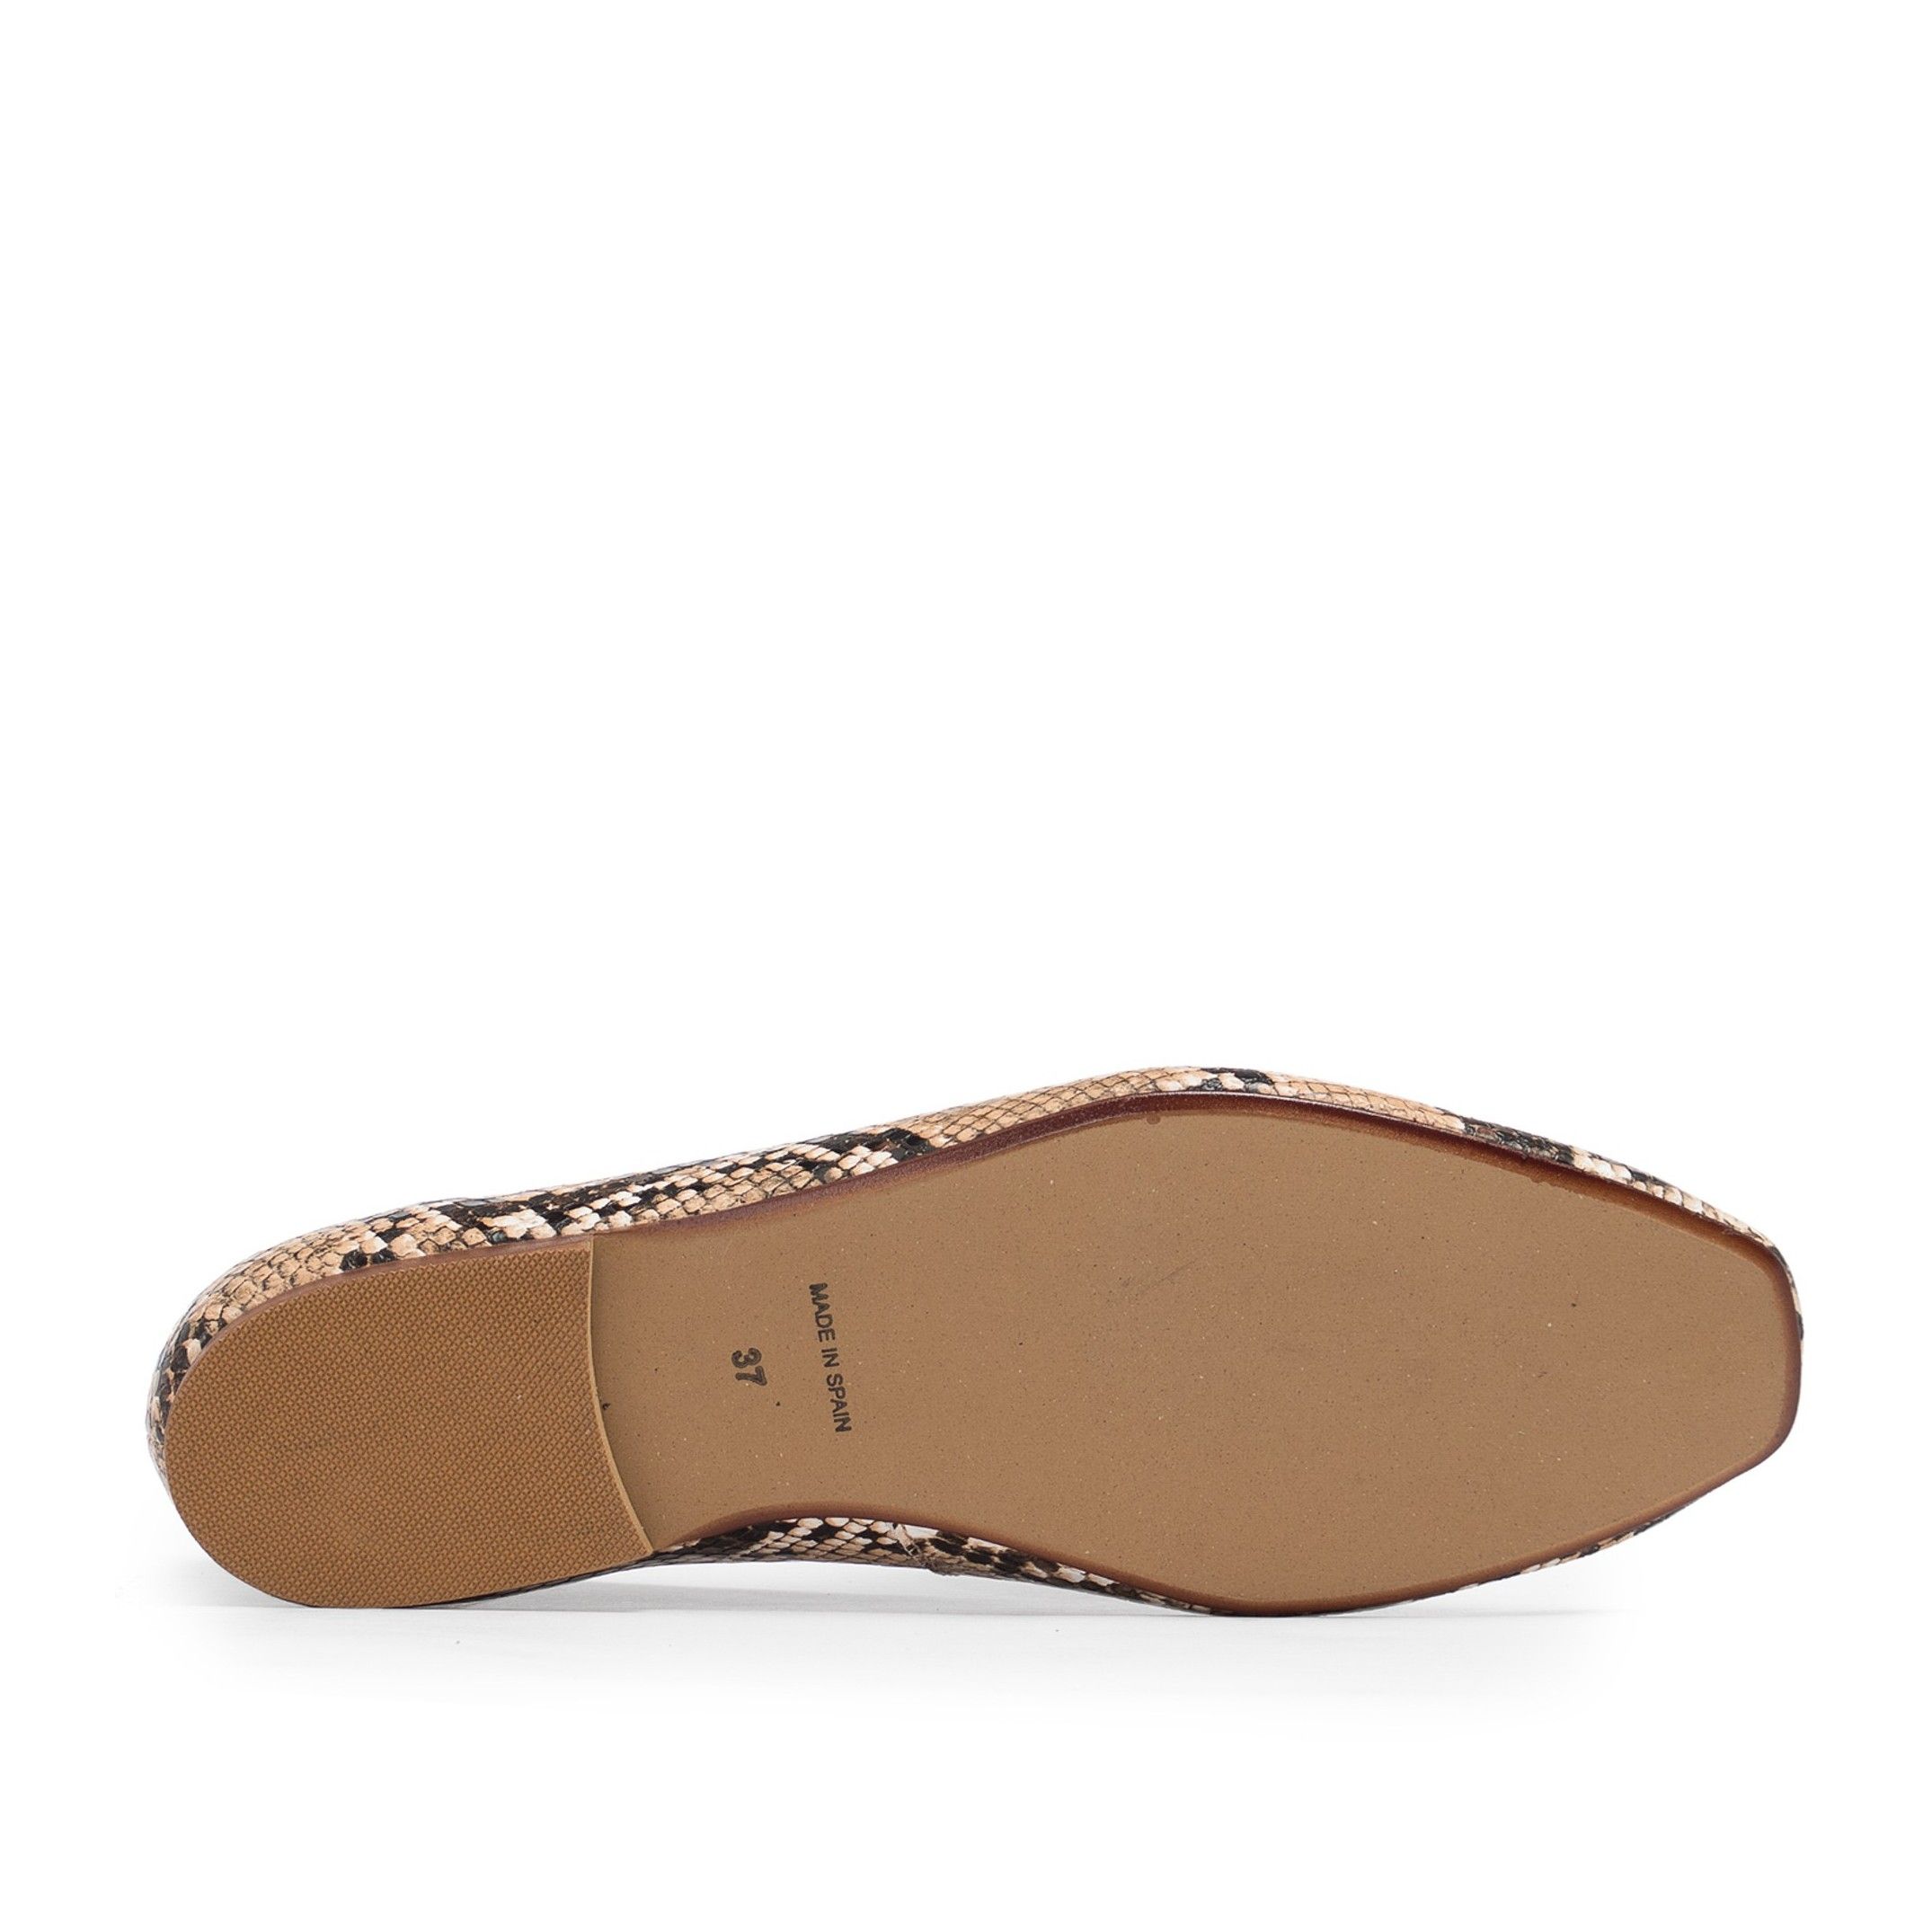 Flat moccasins for women, by Eva López Shoes. Exterior material: leatherette. Open shoe. Inner lining and insole: Breathable, anti-allergic microfiber and keeps the inside of the footwear dry. Sole material: Cuerolite. Heel height 1 cm. Designed and manuf